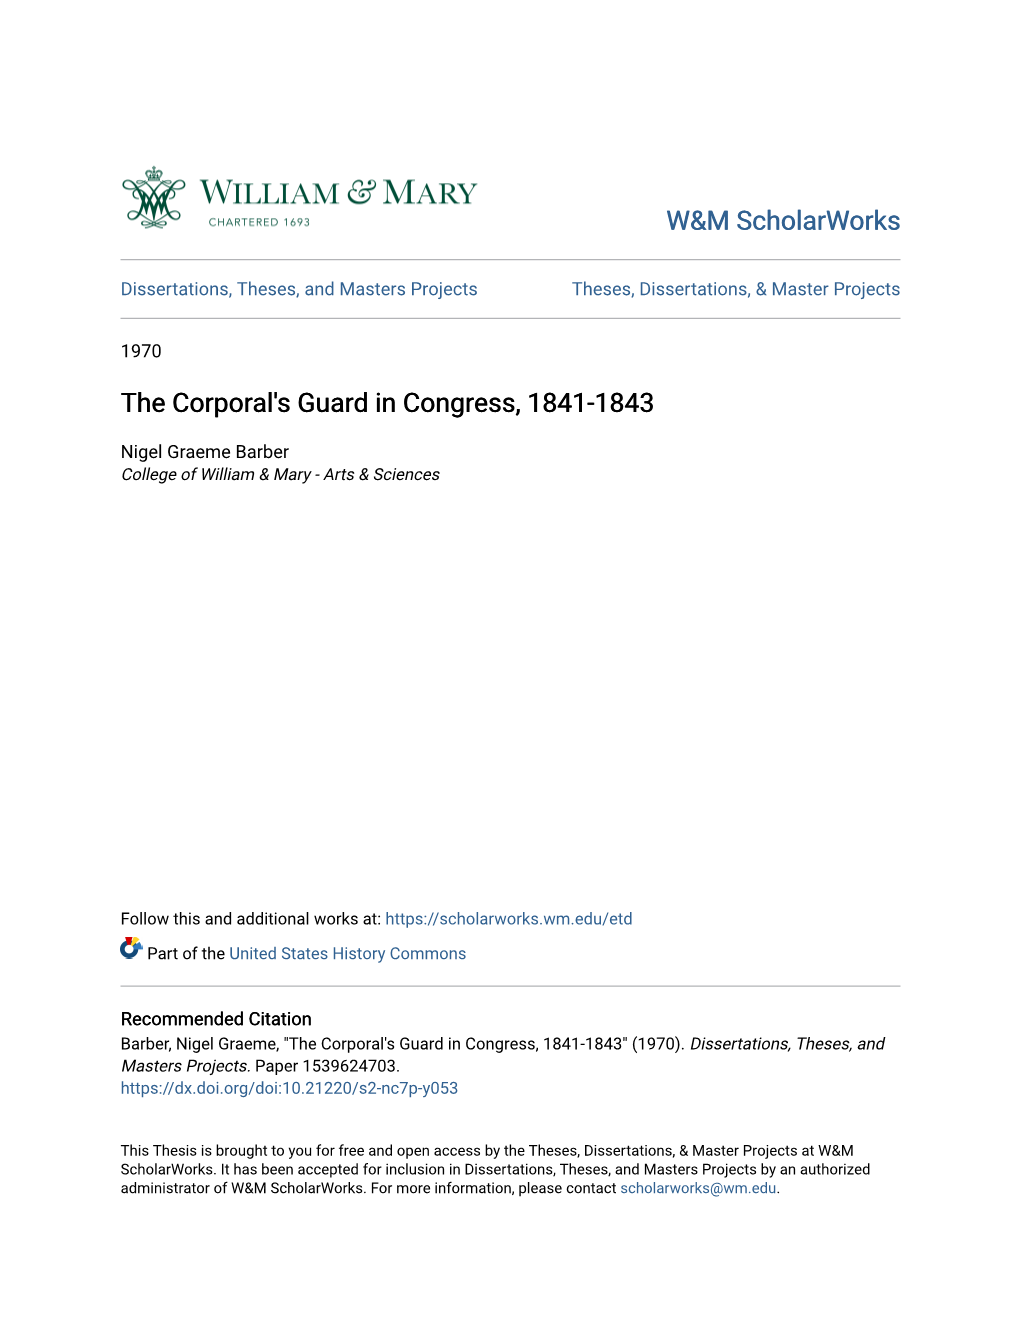 The Corporal's Guard in Congress, 1841-1843